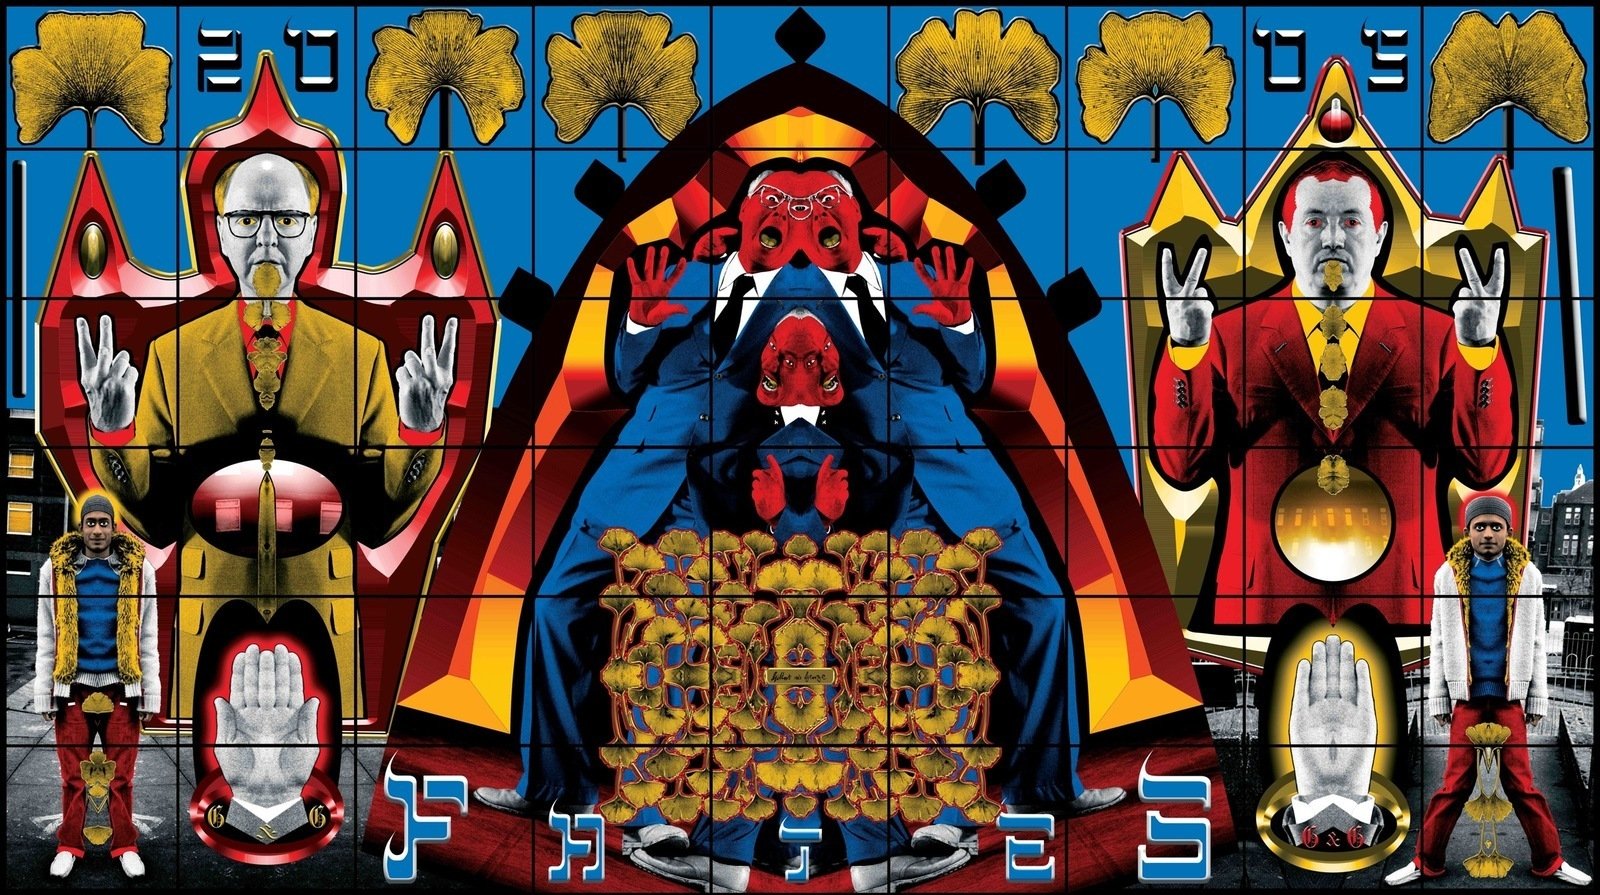 Gilbert &amp; George. Fates, 2005. Digital transfer on photographic paper with India ink. 426 x 760 cm. Tate, London.